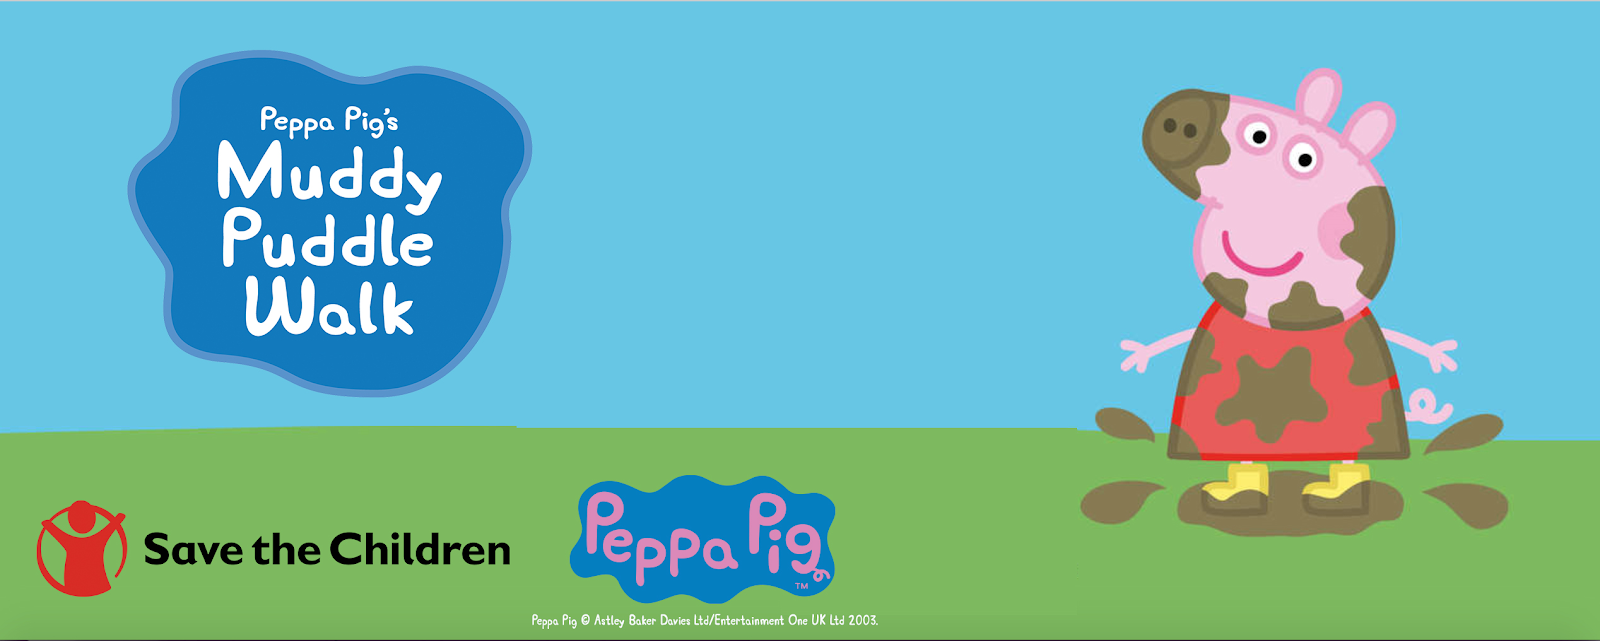 Peppa Pig's Muddy Puddle Walk for Save the Children Australia | 13-19 ...